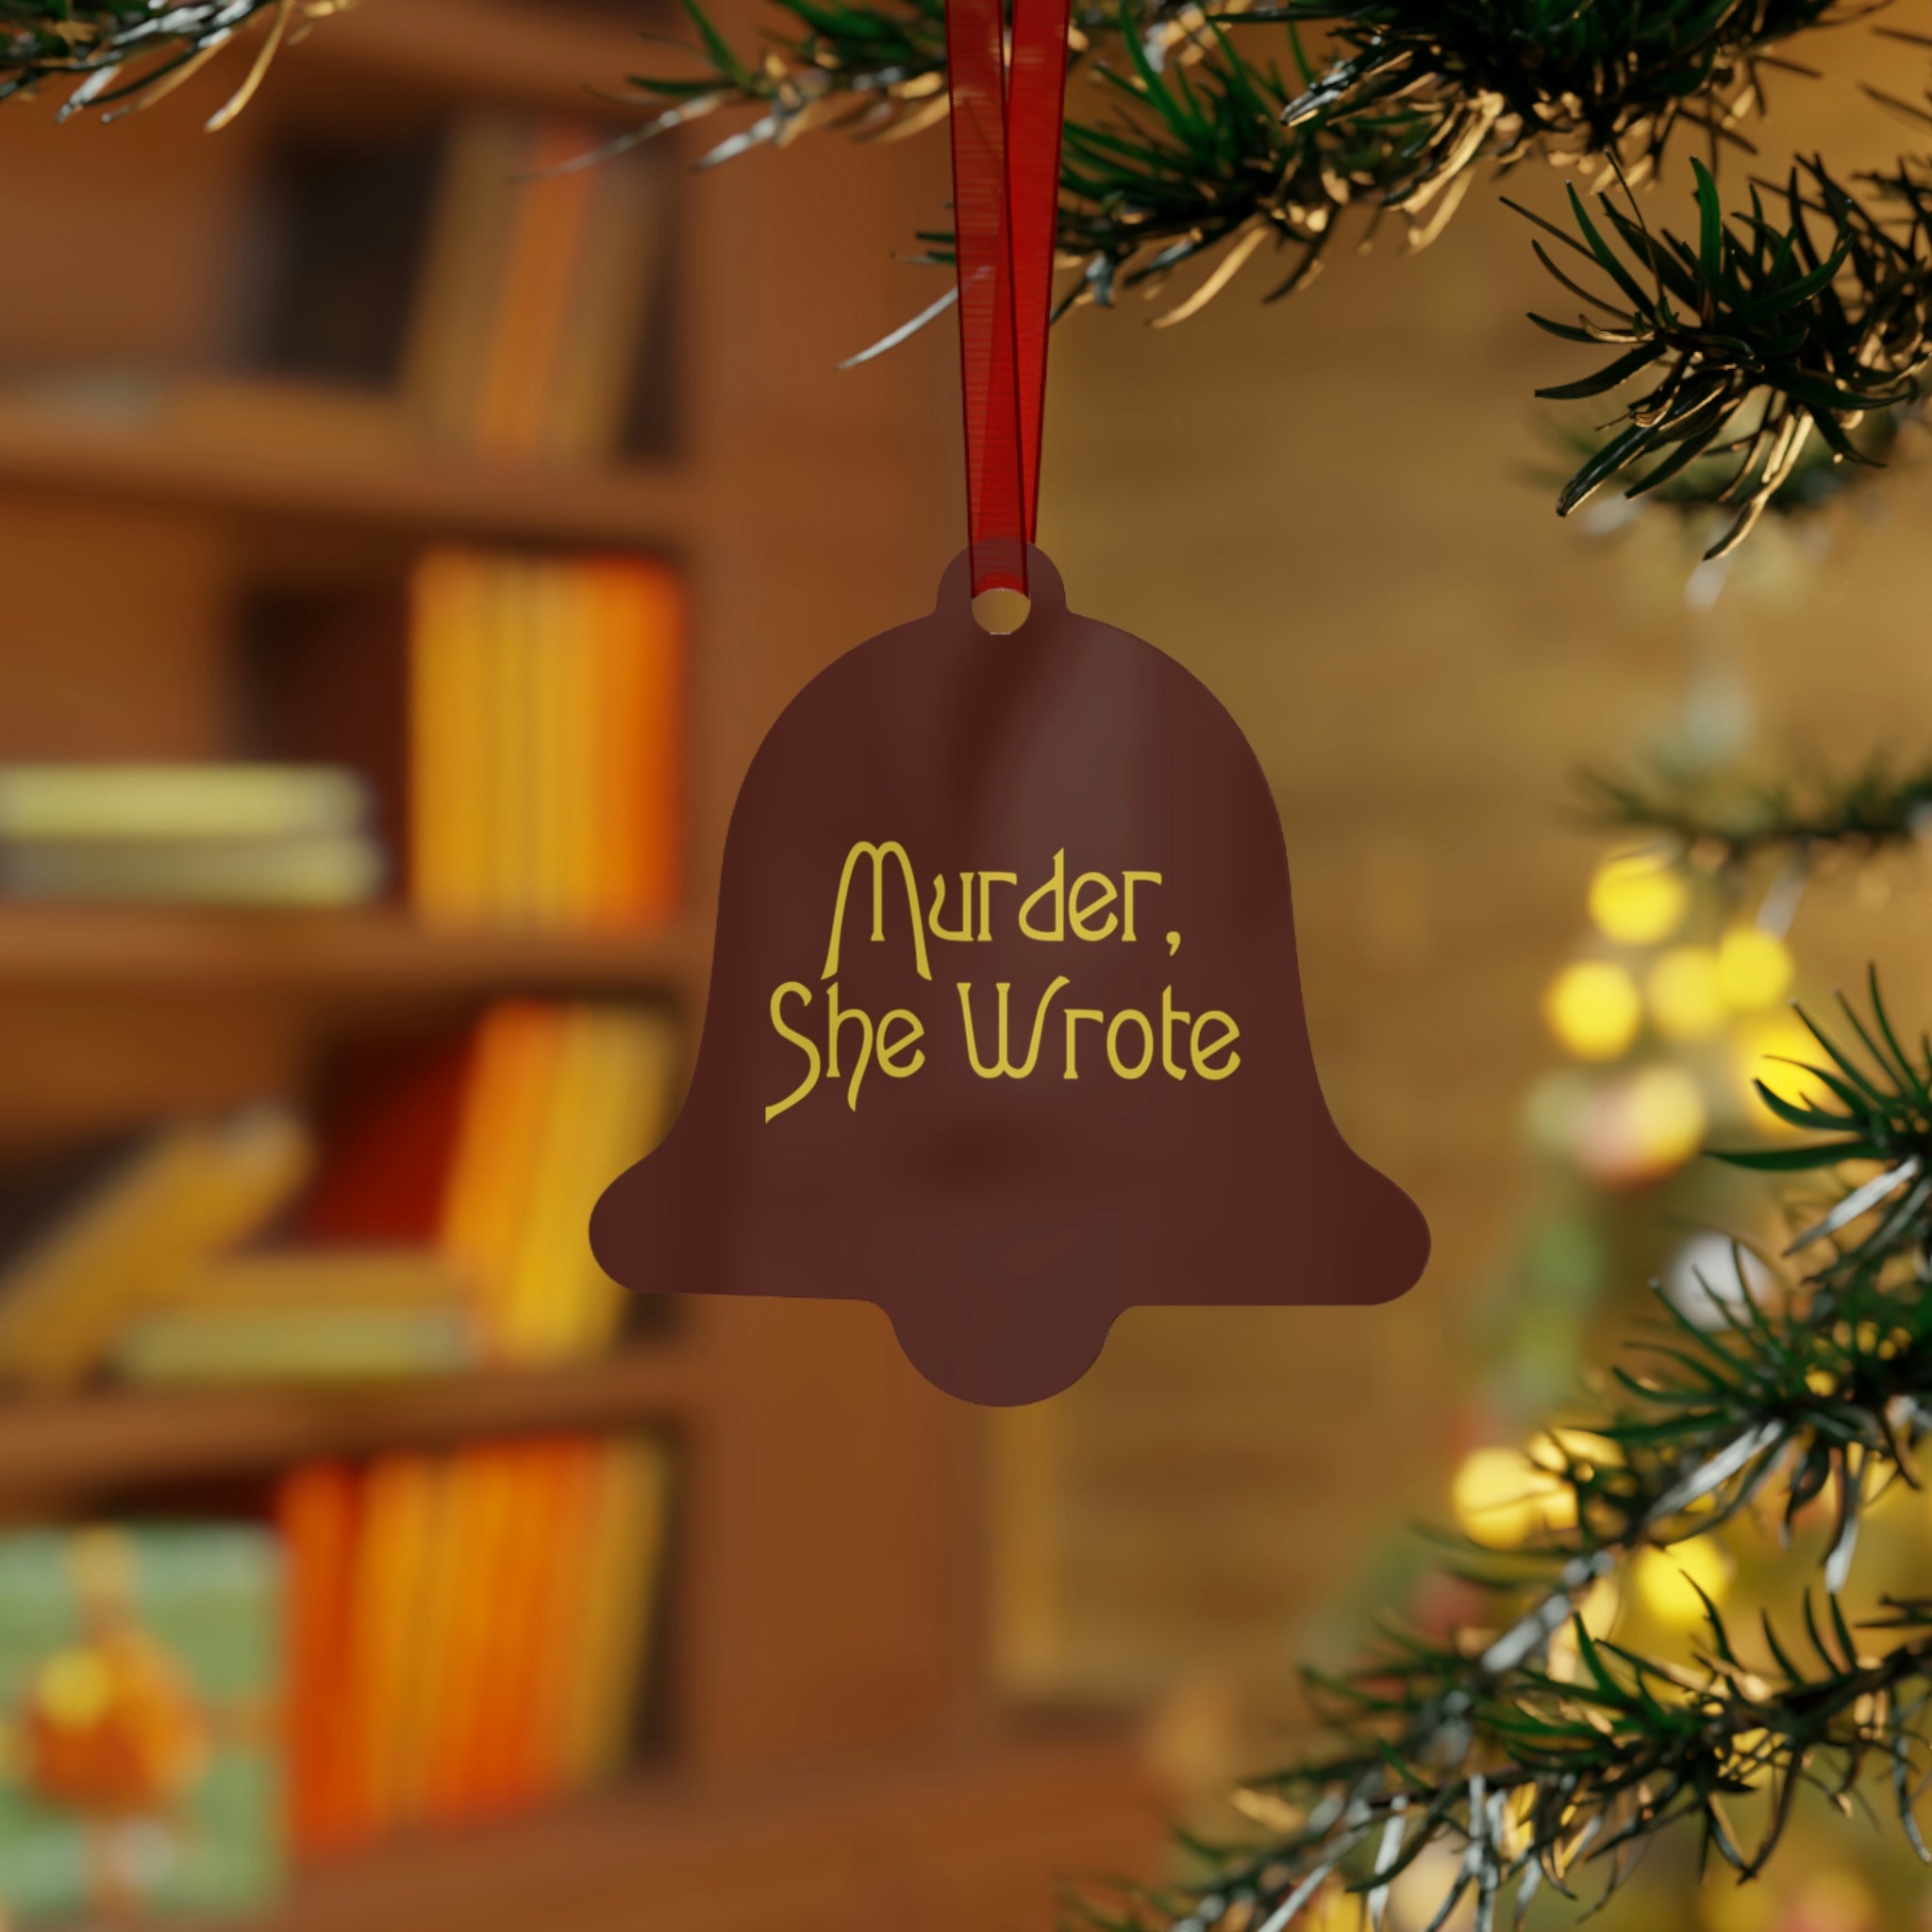 Murder She Wrote Christmas Ornaments, Metal, 4 Shapes - Durazza